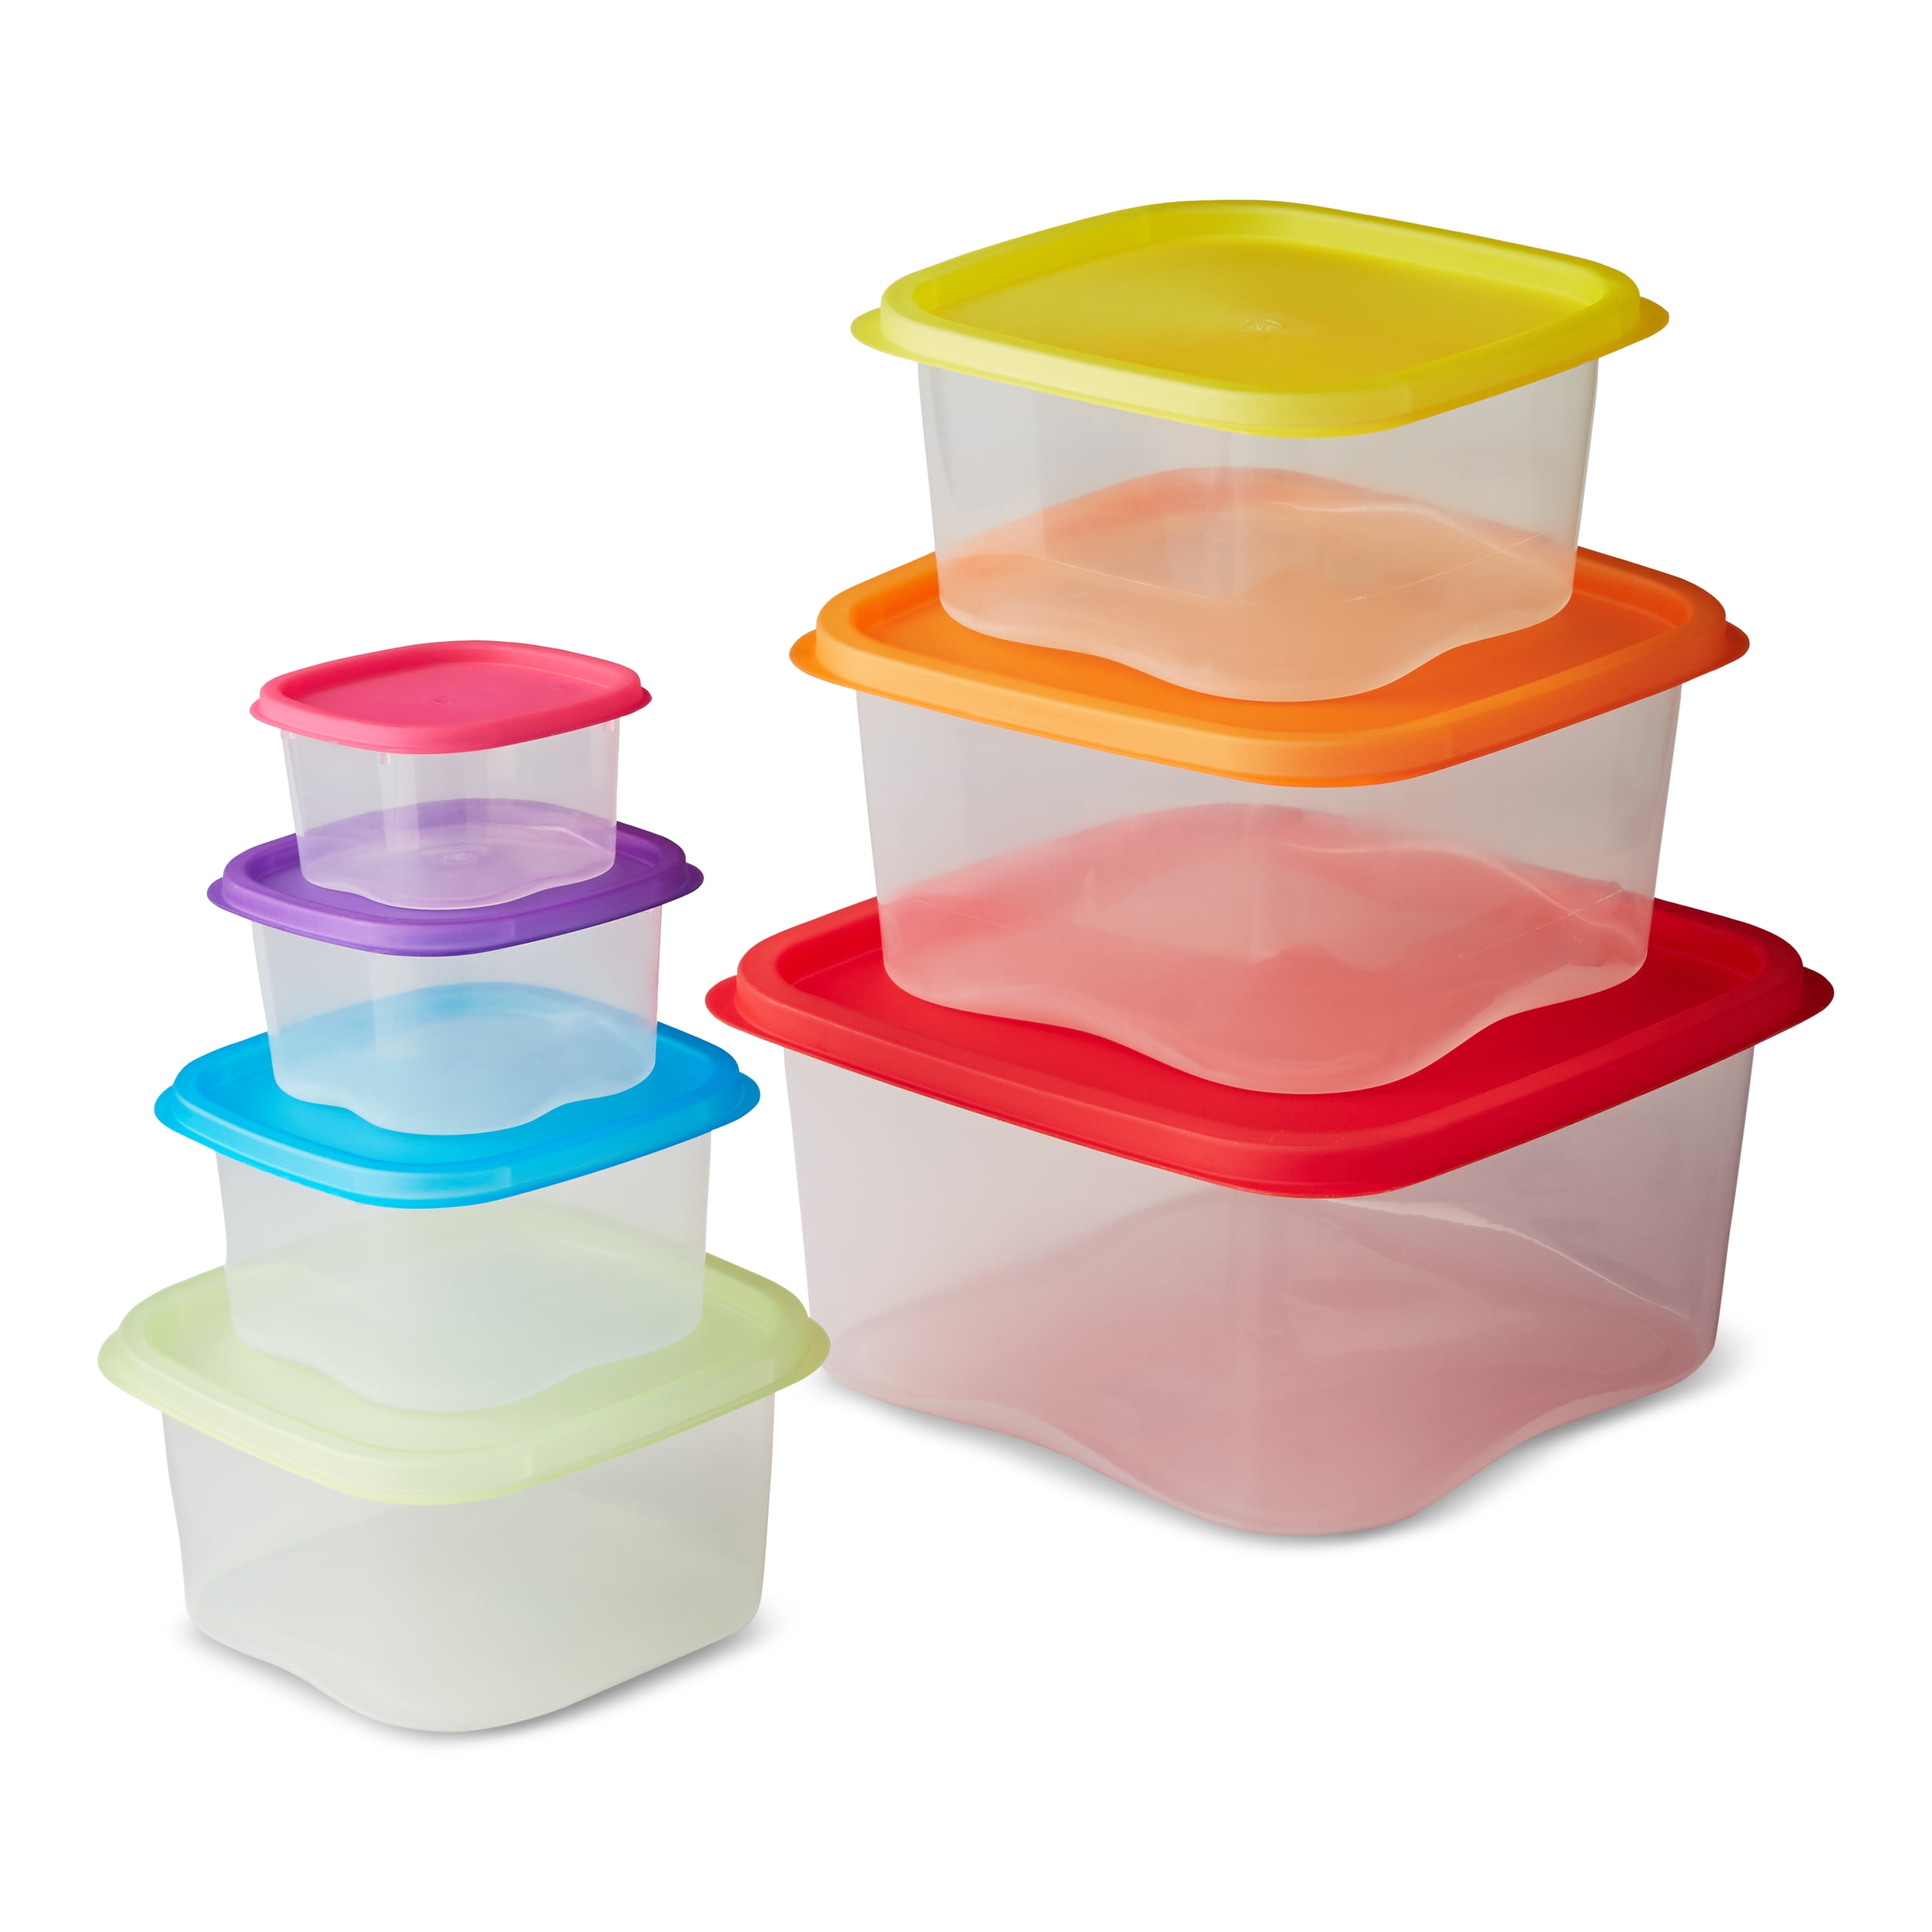 Mainstays 14 Piece Rainbow Square Food Storage Containers with Lids